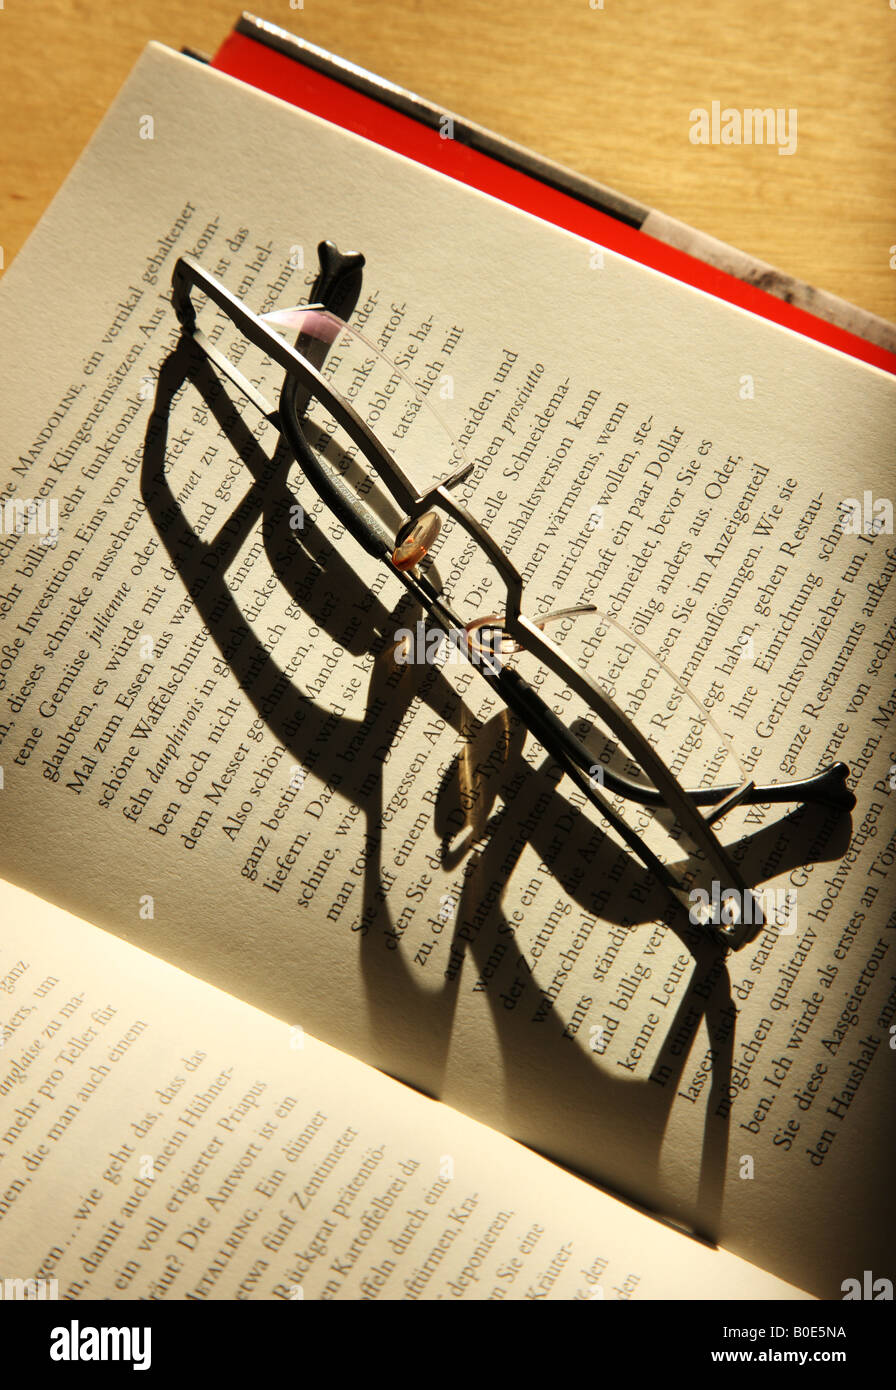 Reading glasses on an open book Stock Photo